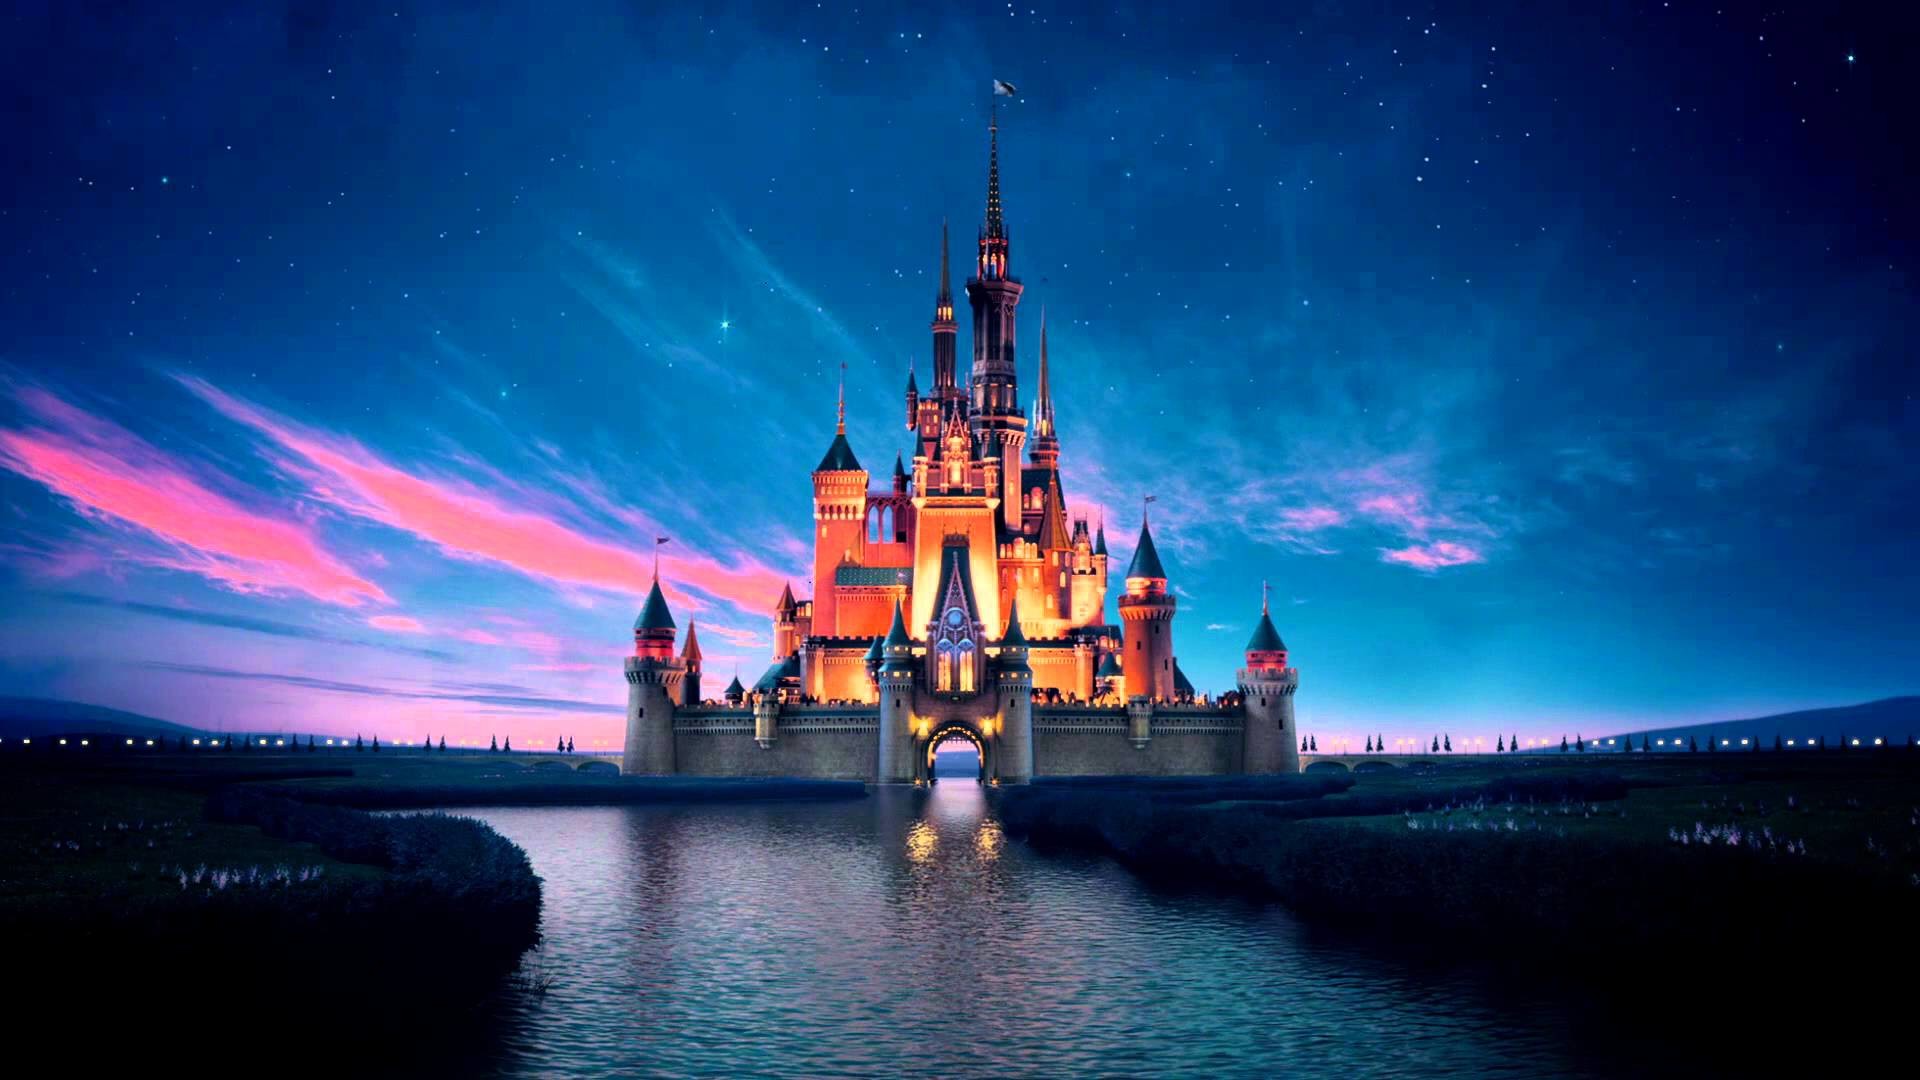 Wallpapers For > Disney Castle Background Tumblr